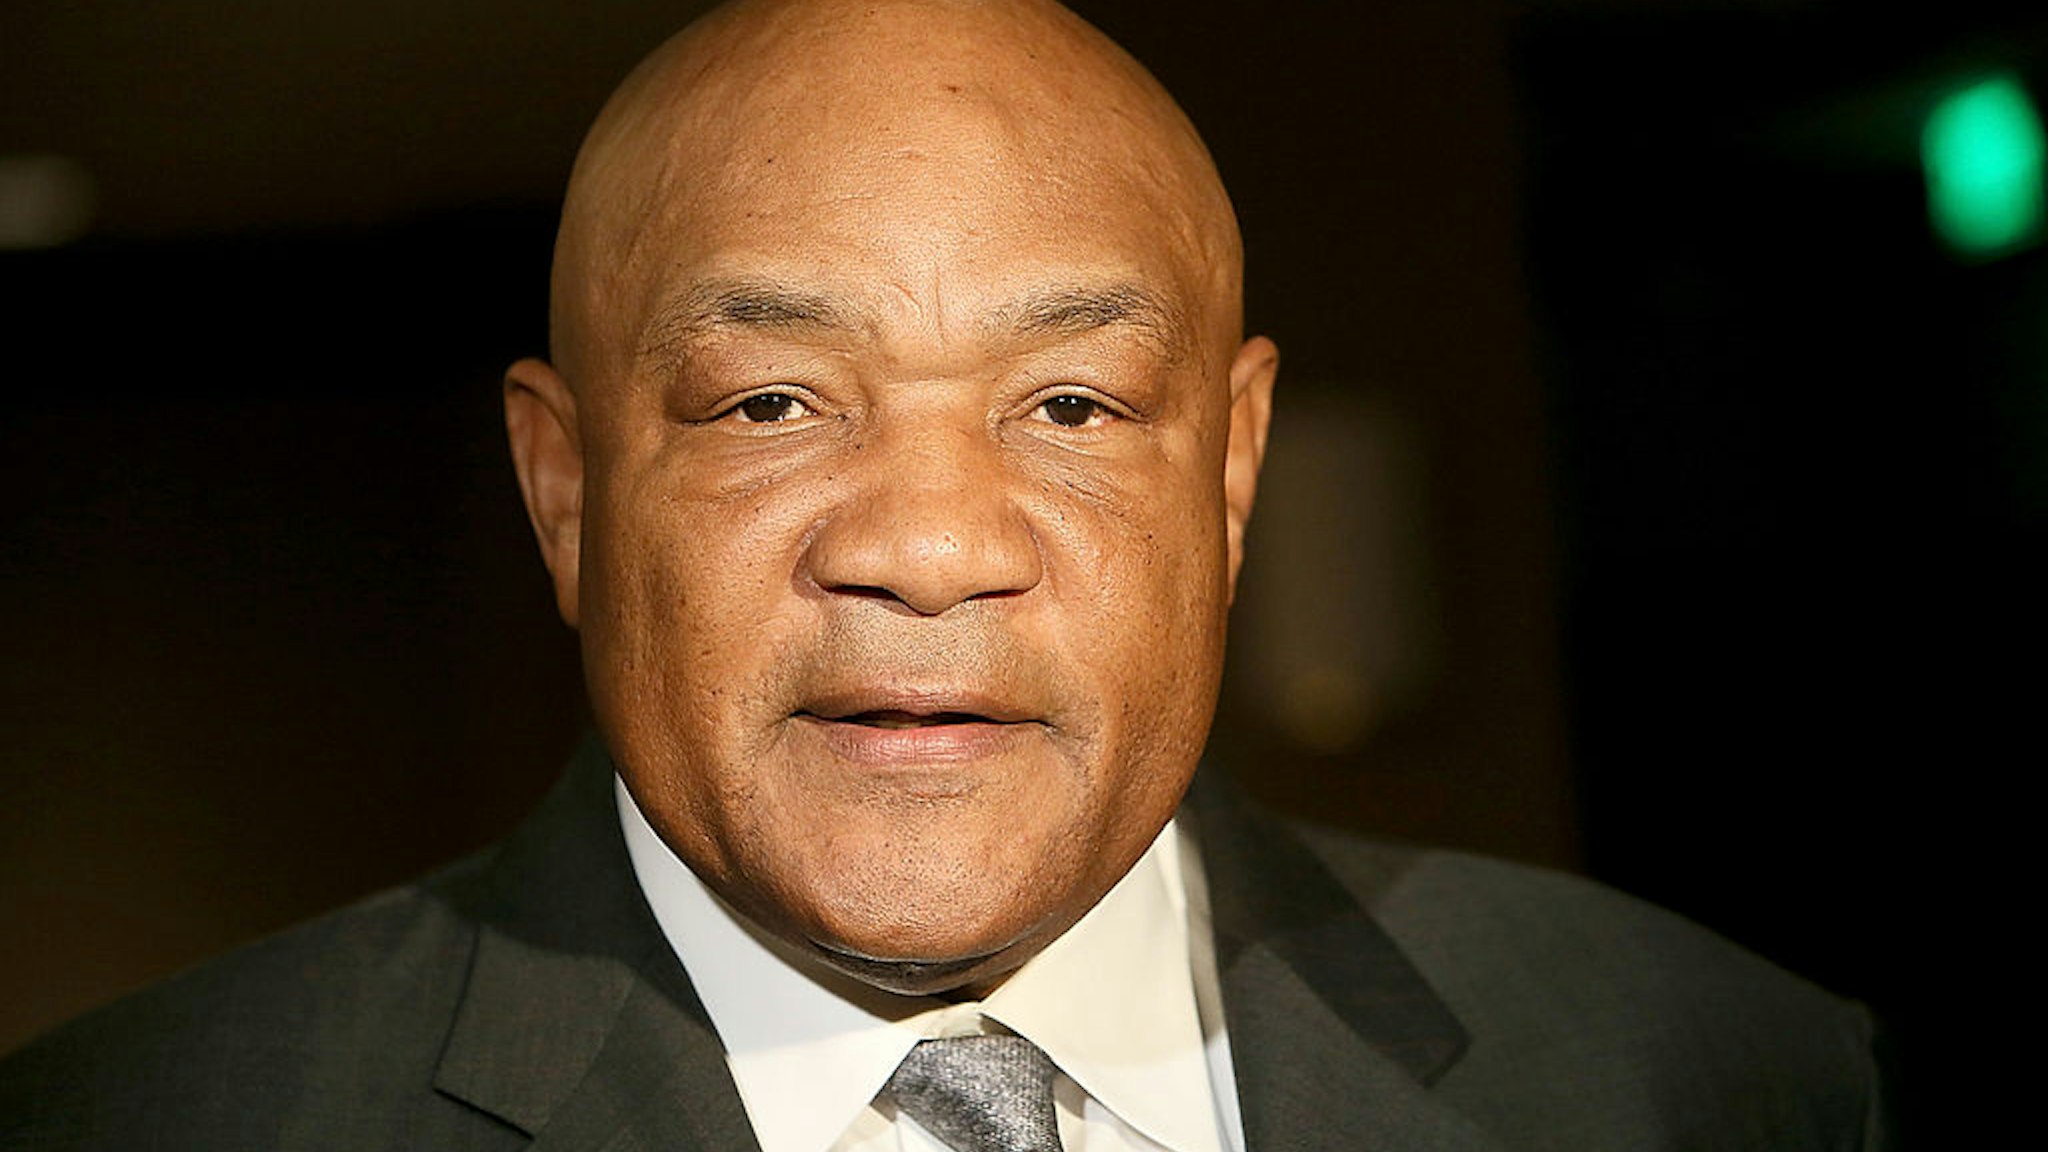 George Foreman attends a news conference announcing the formation of Foreman Boys Promotions which will be run by his sons George Foreman Jr. and George Foreman IV at The Frank Erwin Center on March 19, 2013 in Austin, Texas.